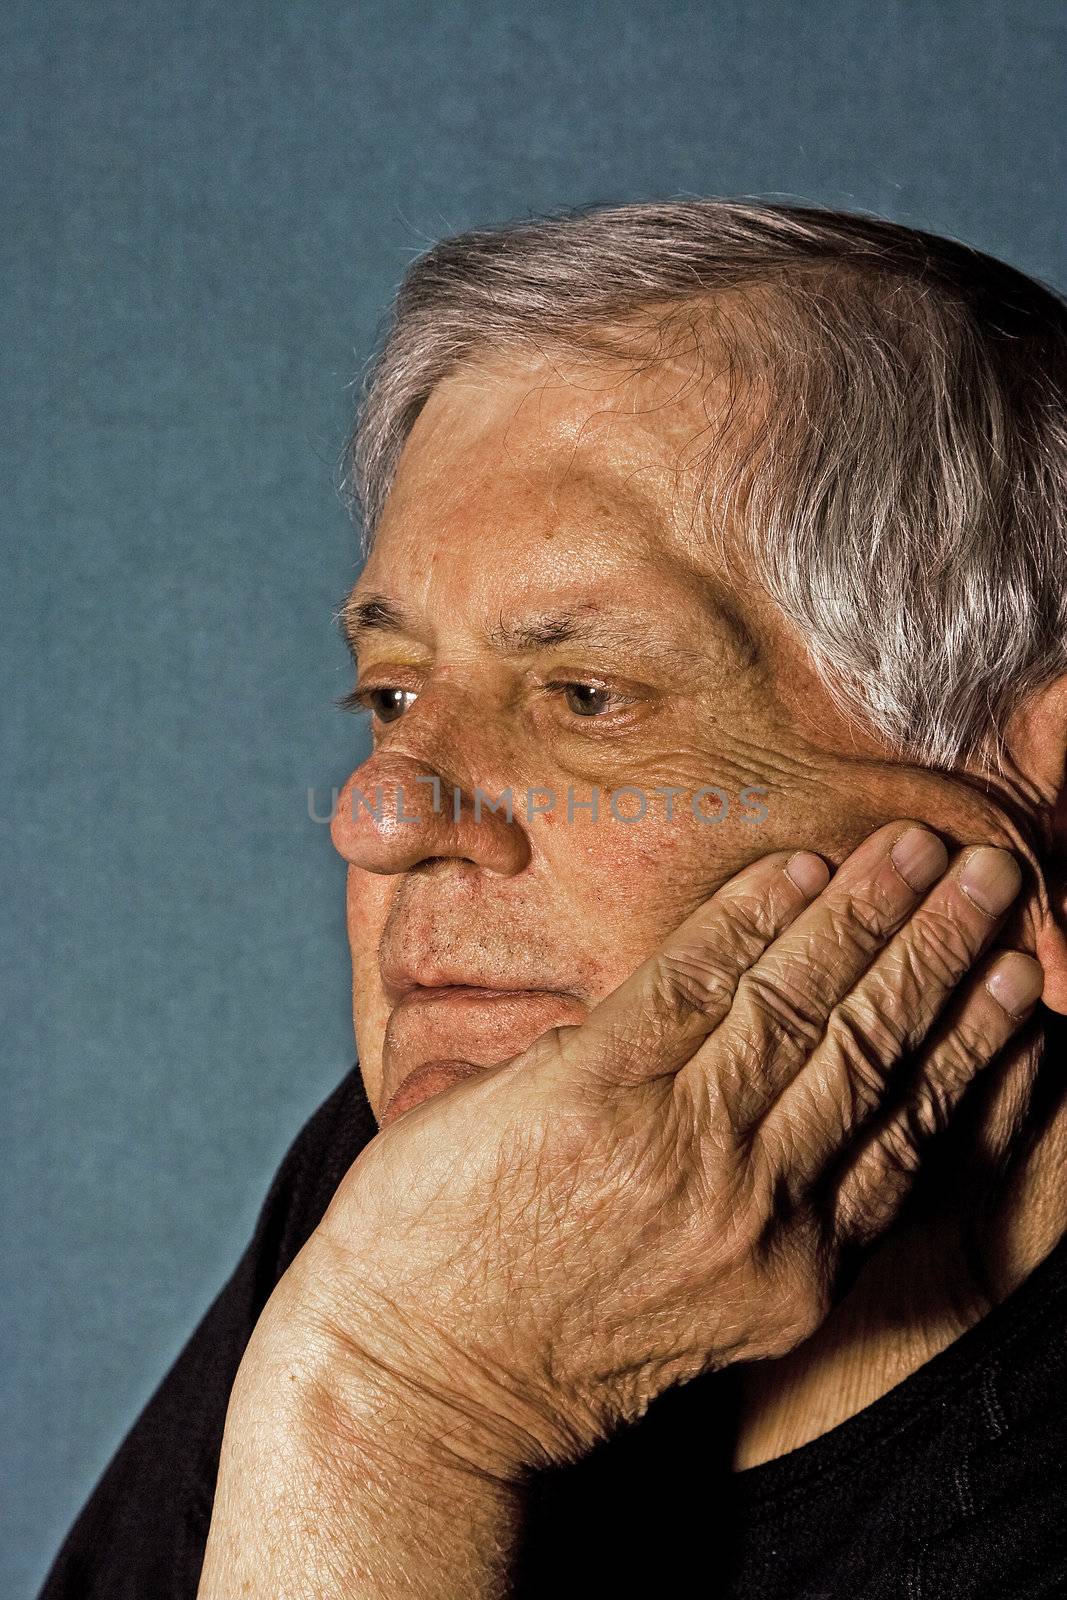 Dramatic side portrait of a senior man with his hand on the side of his face wearing a black shirt isolated on gray/blue